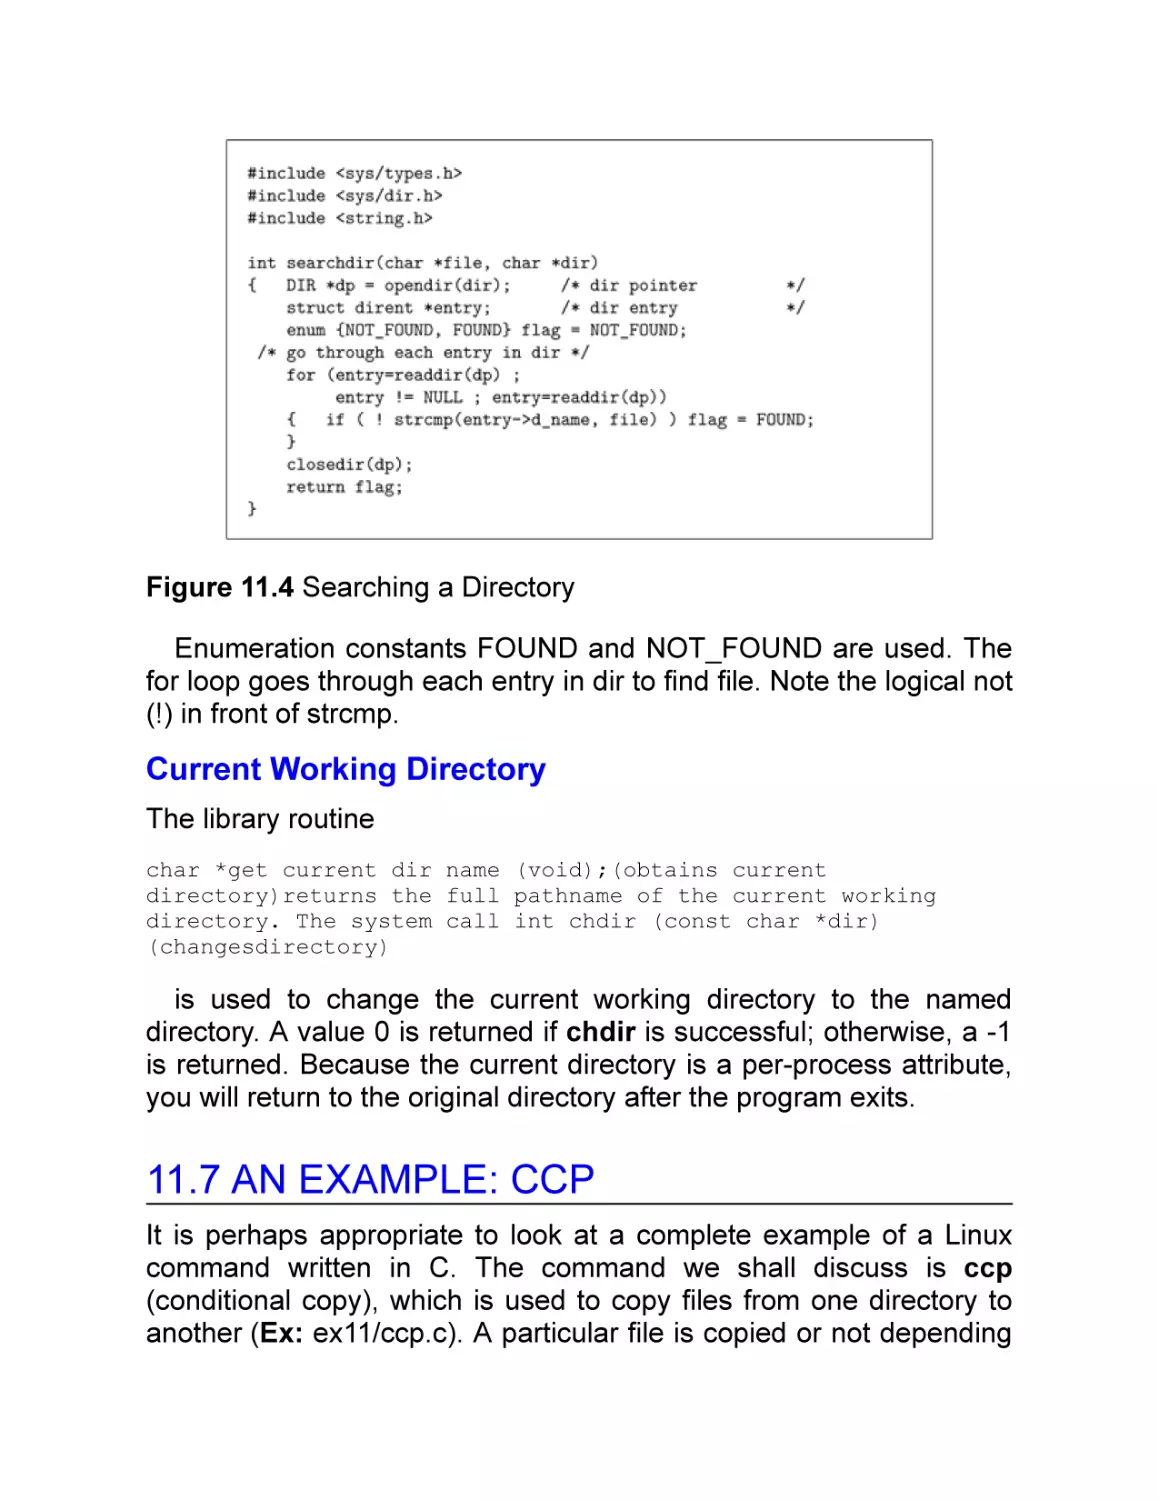 Current Working Directory
11.7 An Example